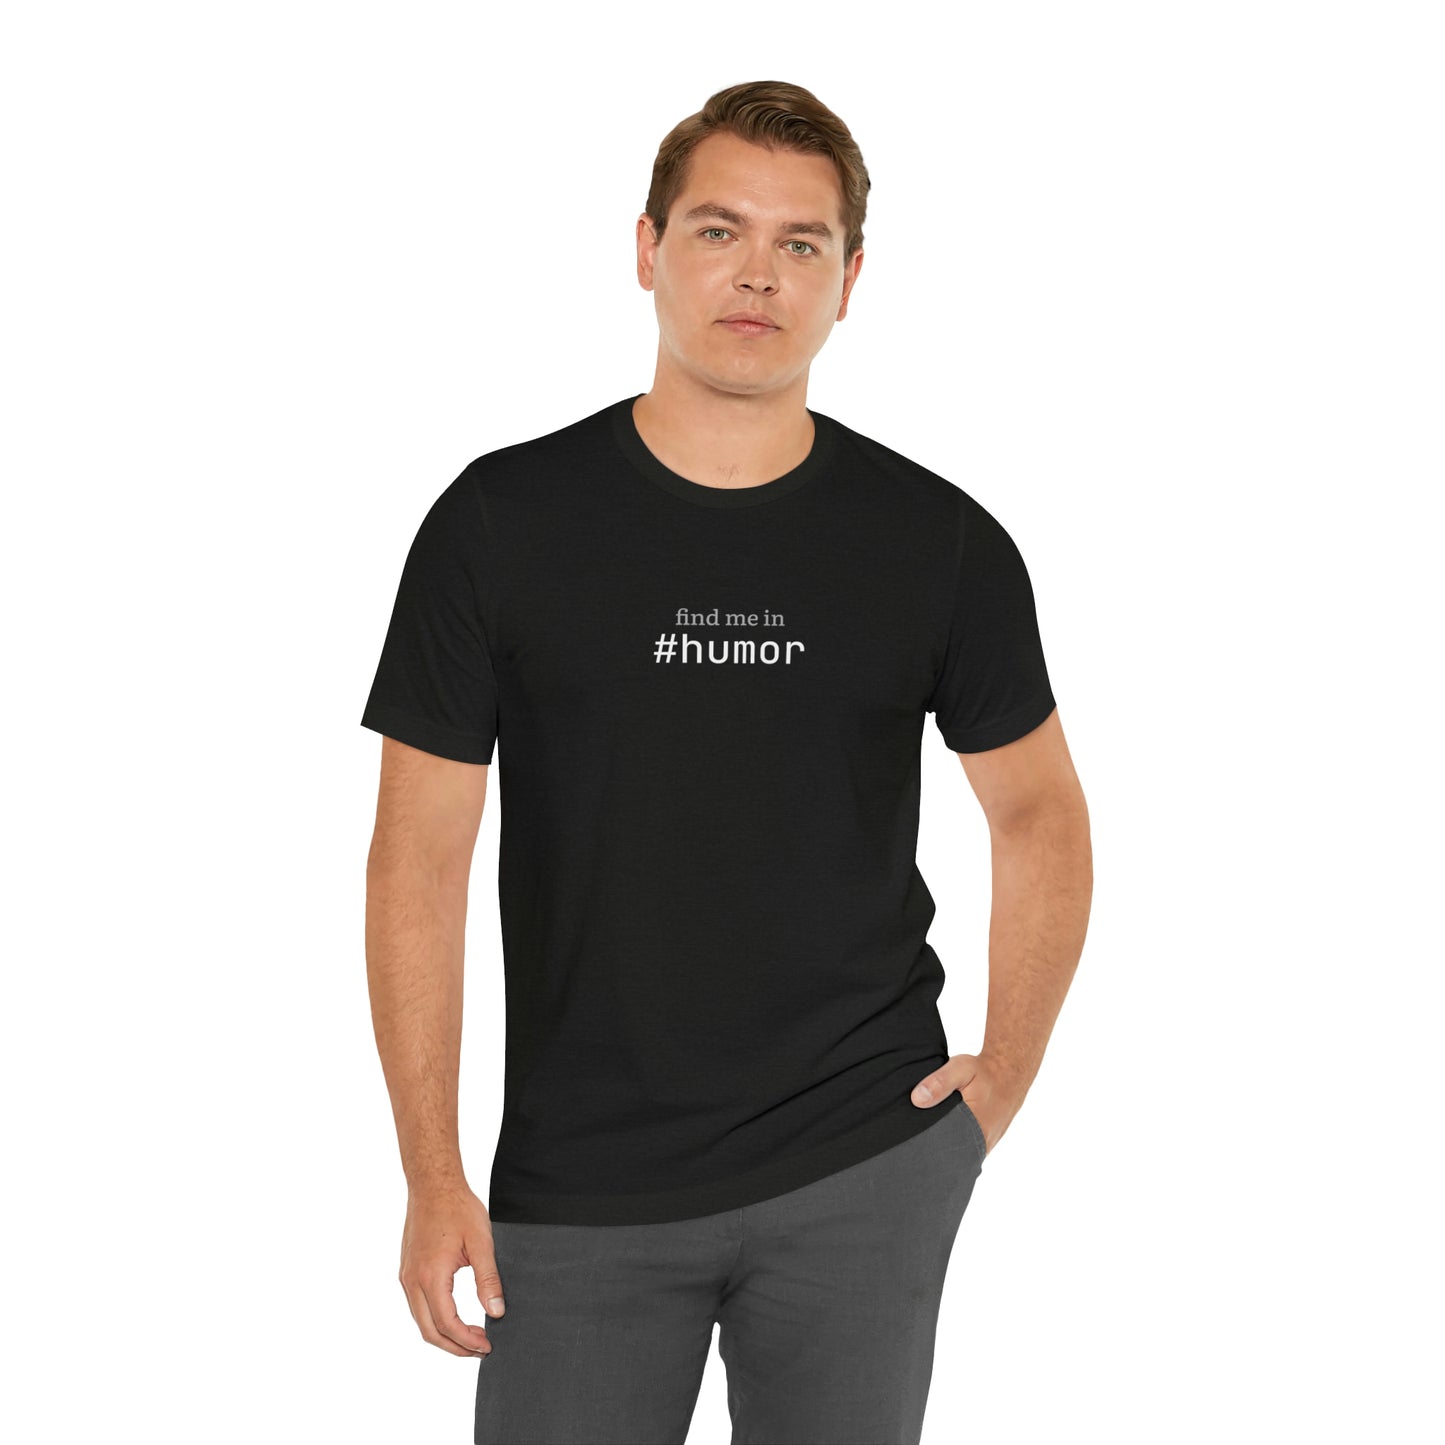 Find me in #humor T-Shirt